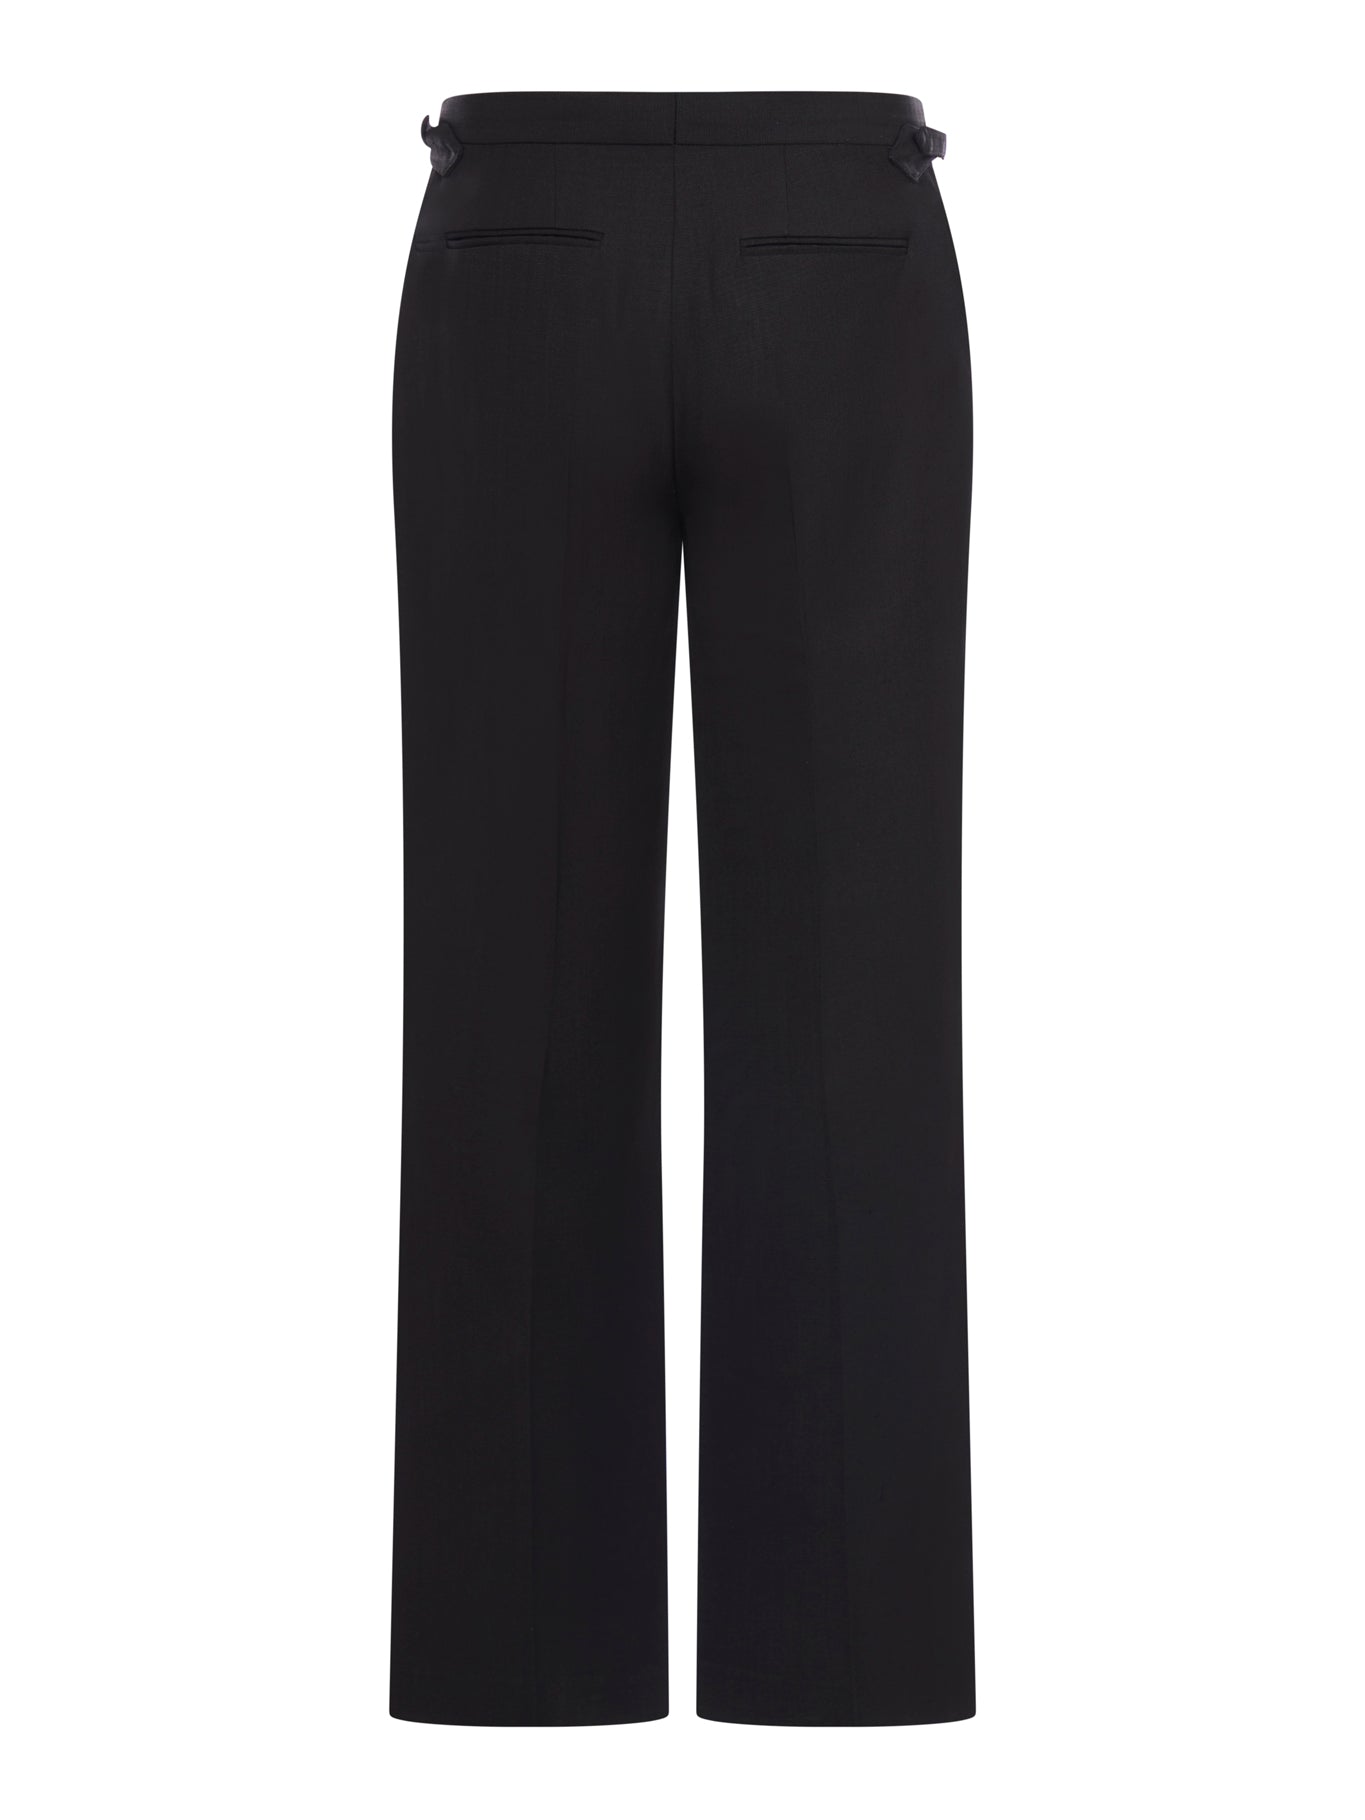 STRAIGHT LEG TROUSER WITH SIDE ADJUSTERS